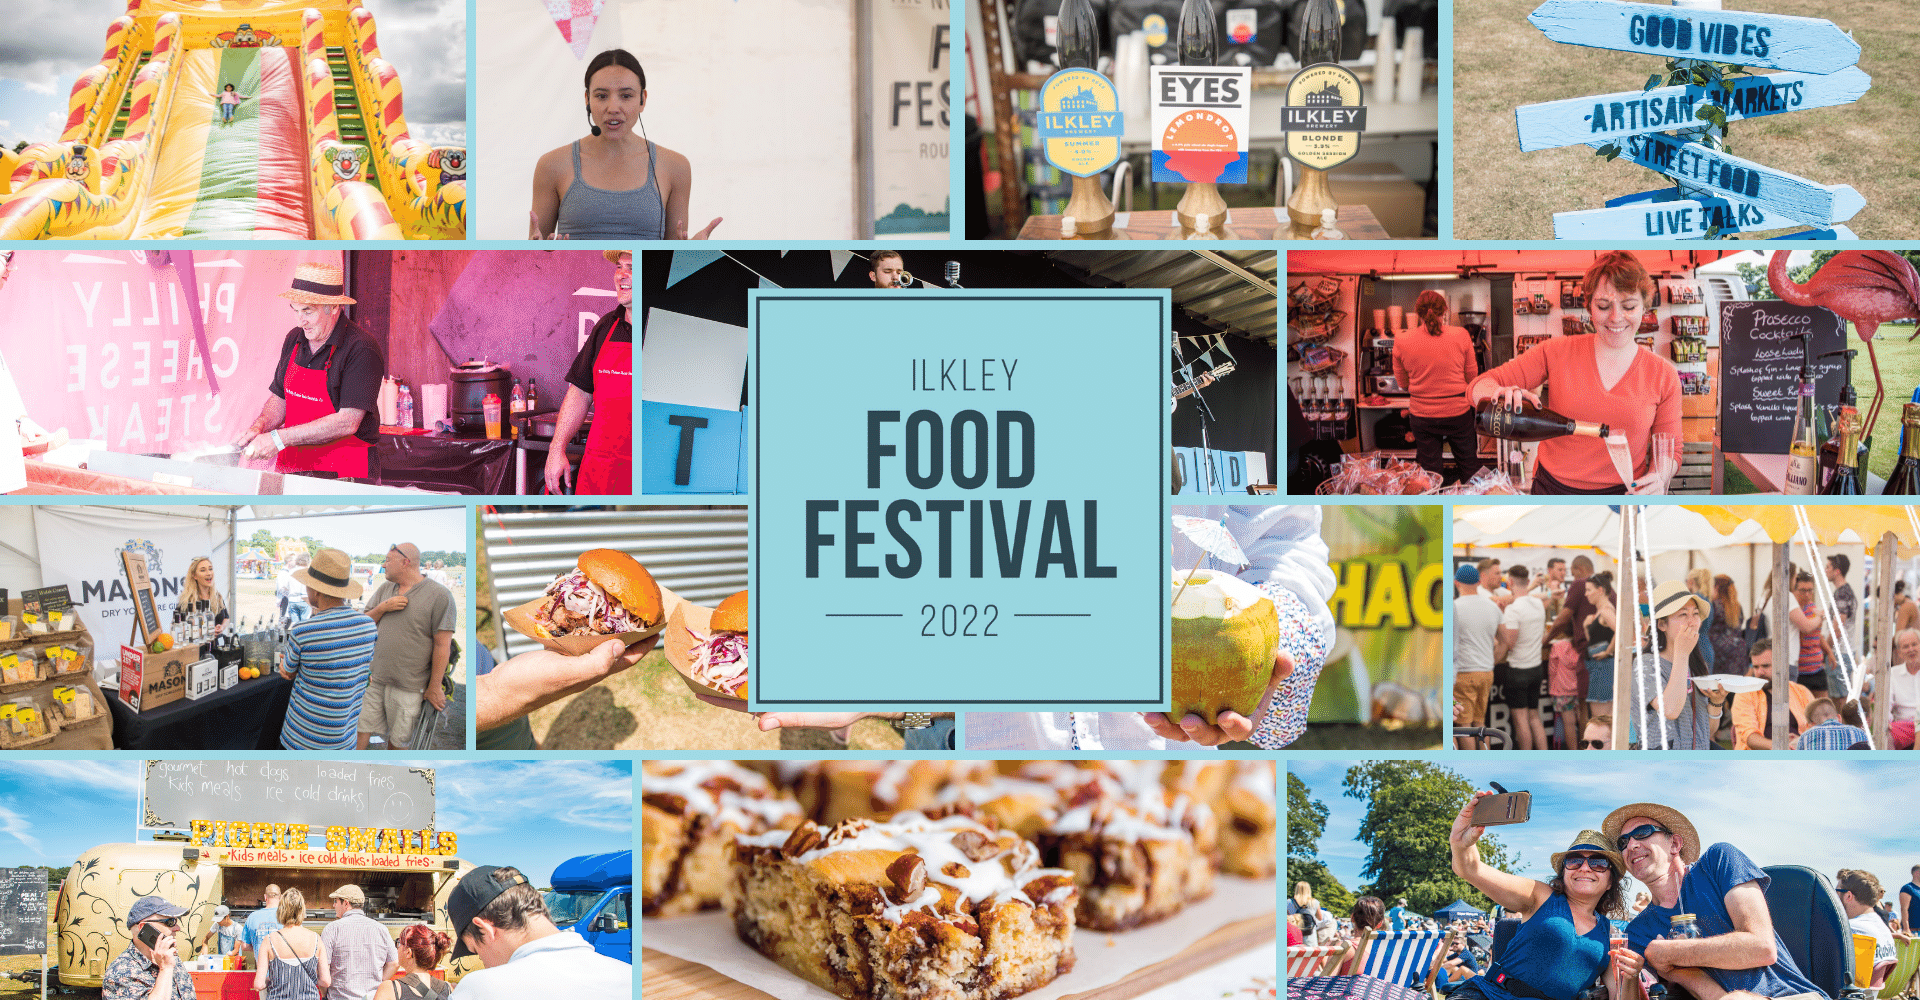 Family food and drink festival in Ilkley town centre